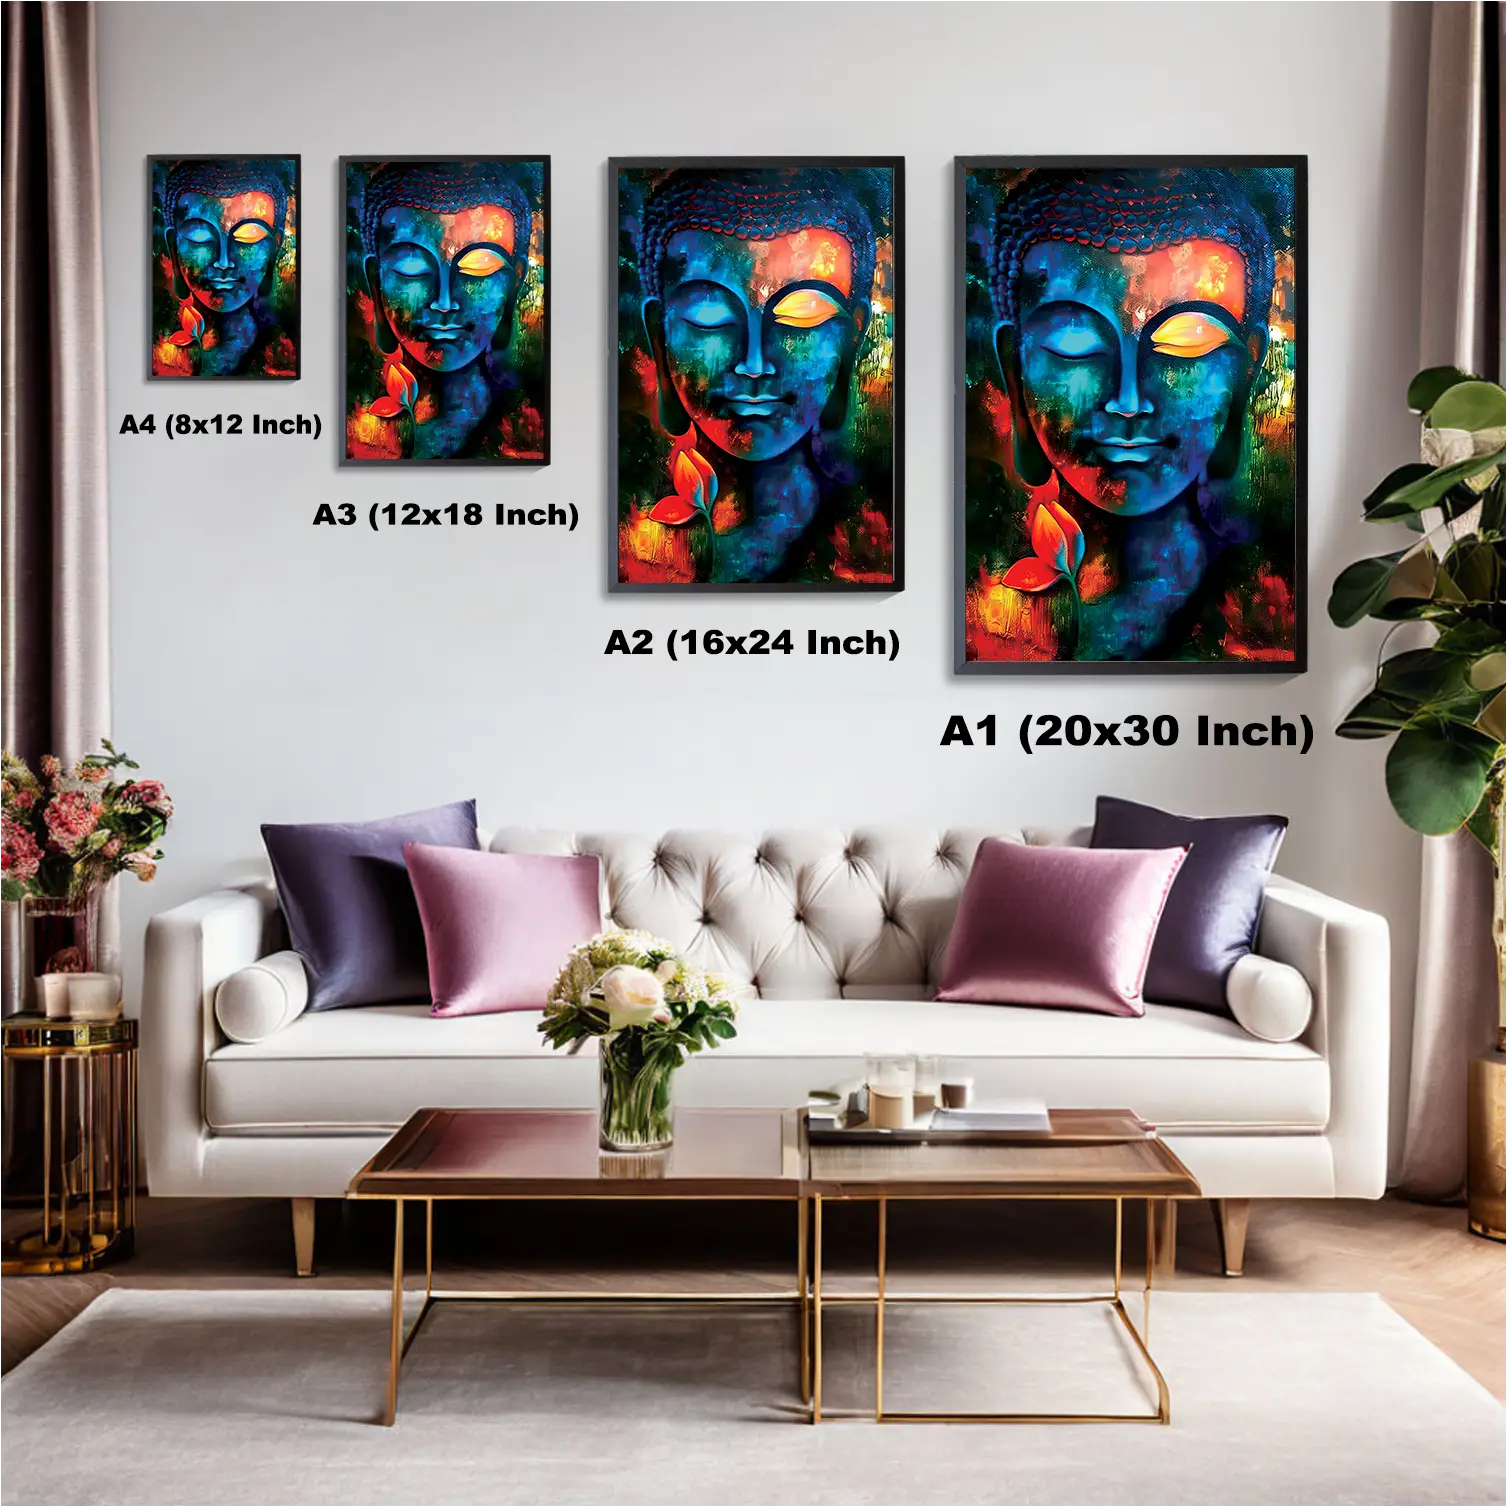 Lord Buddha Poster | Frame | Canvas